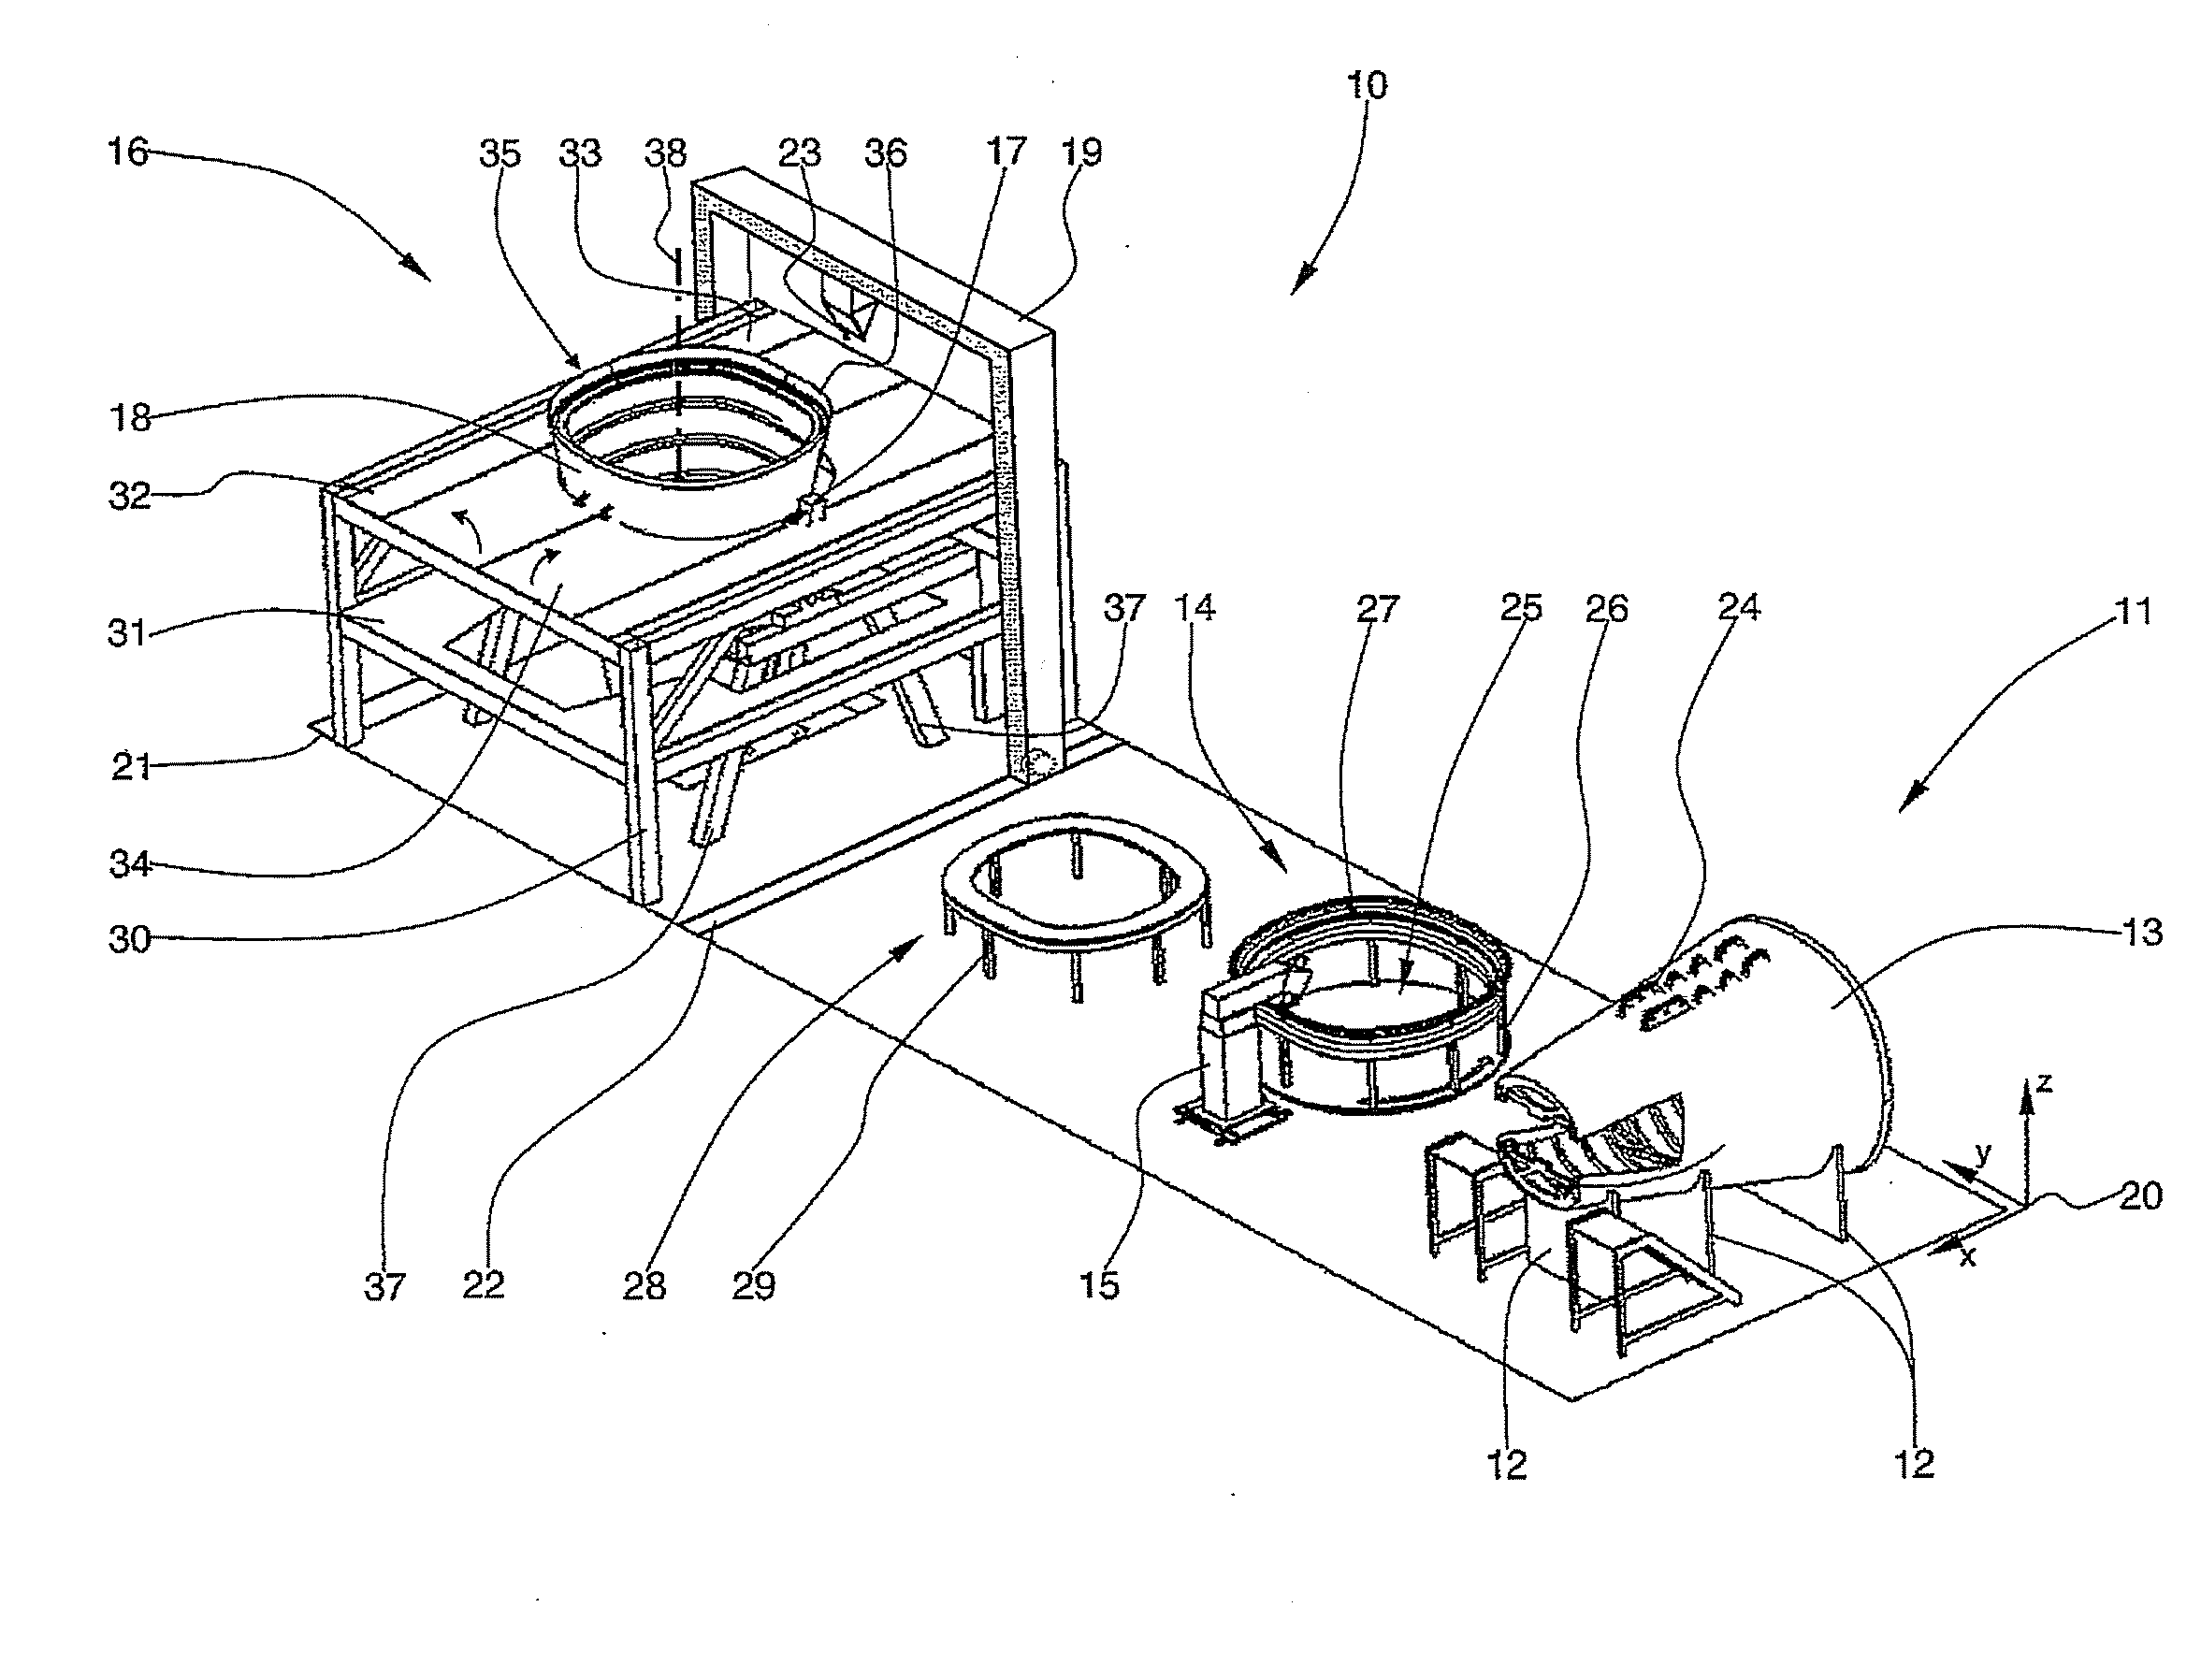 Method for installing a dome-shaped pressure bulkhead in a rear section of an aircraft, and device for carrying out the method